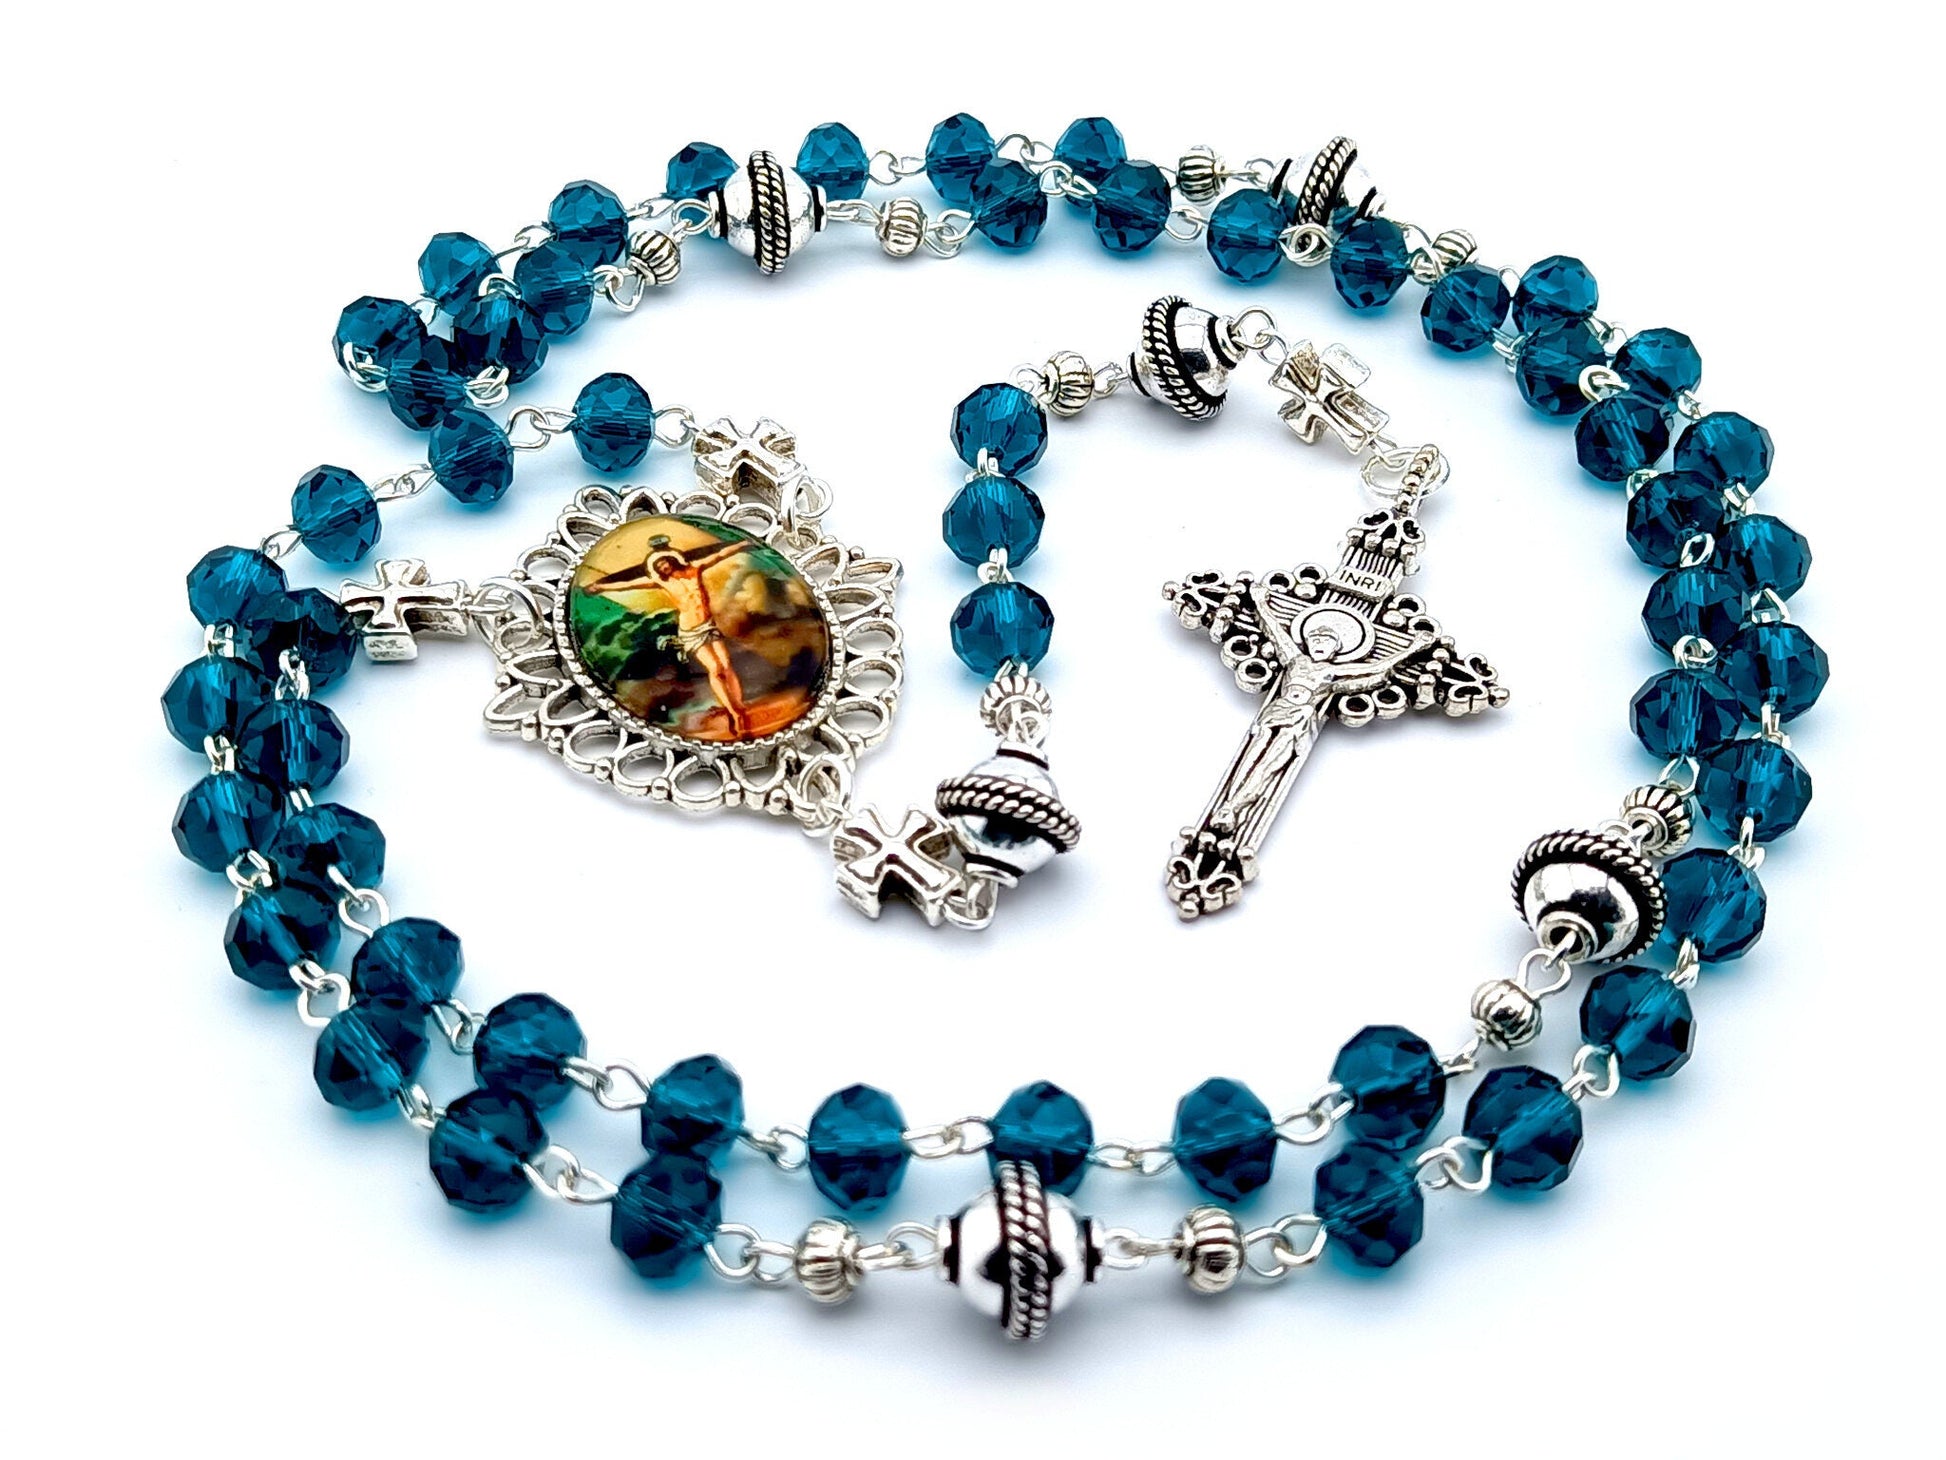 The Crucifixion unique rosary beads with blue faceted glass and silver beads, silver crucifix and picture centre medal.